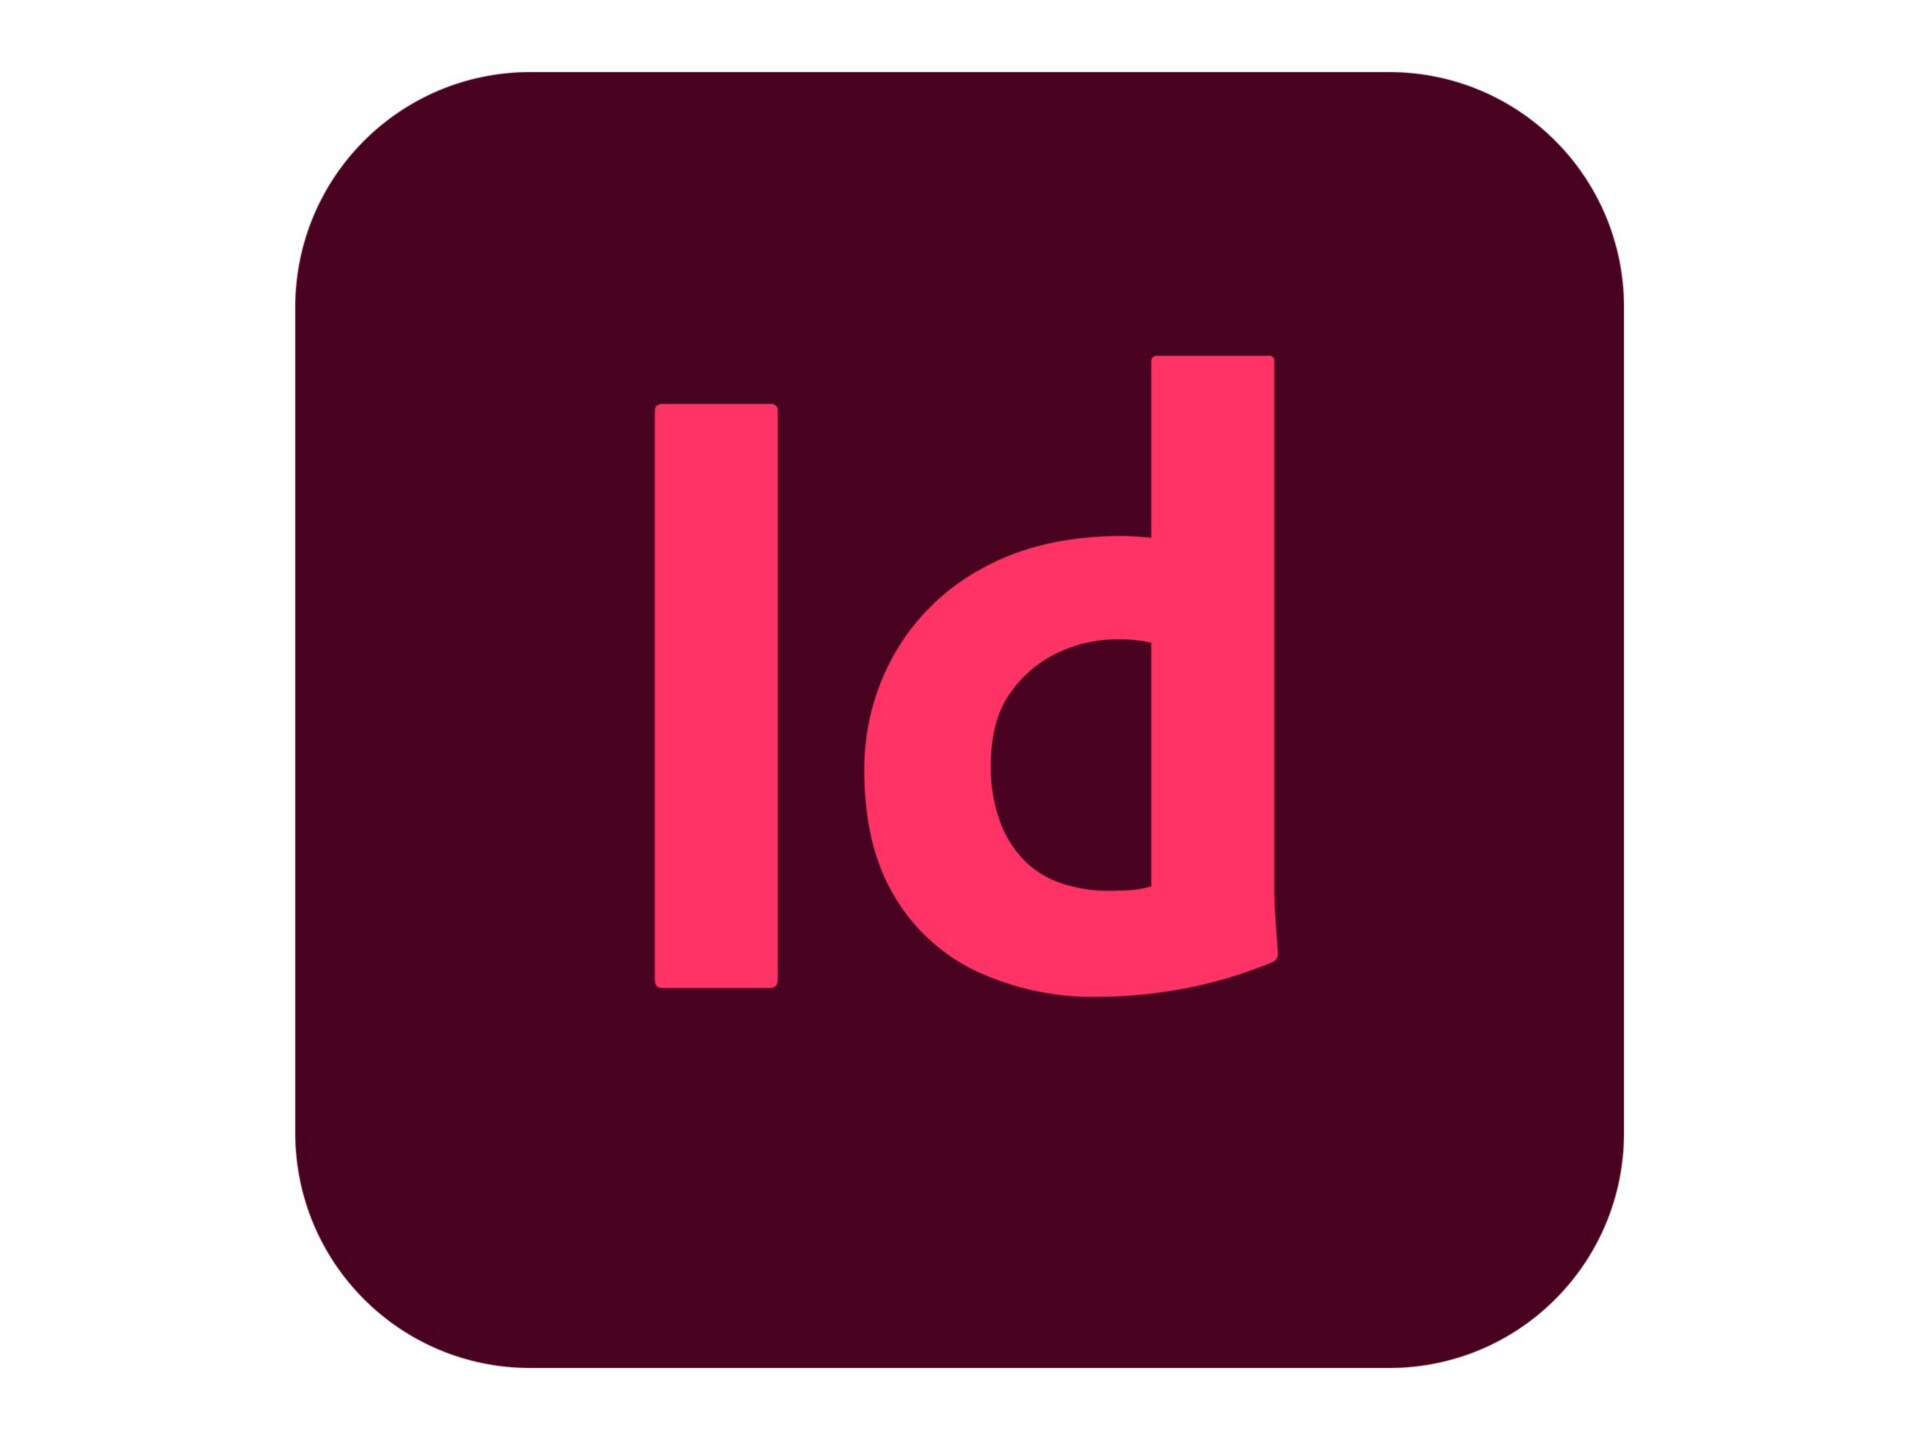 Adobe InDesign CC for teams - Subscription New (2 years) - 1 named user